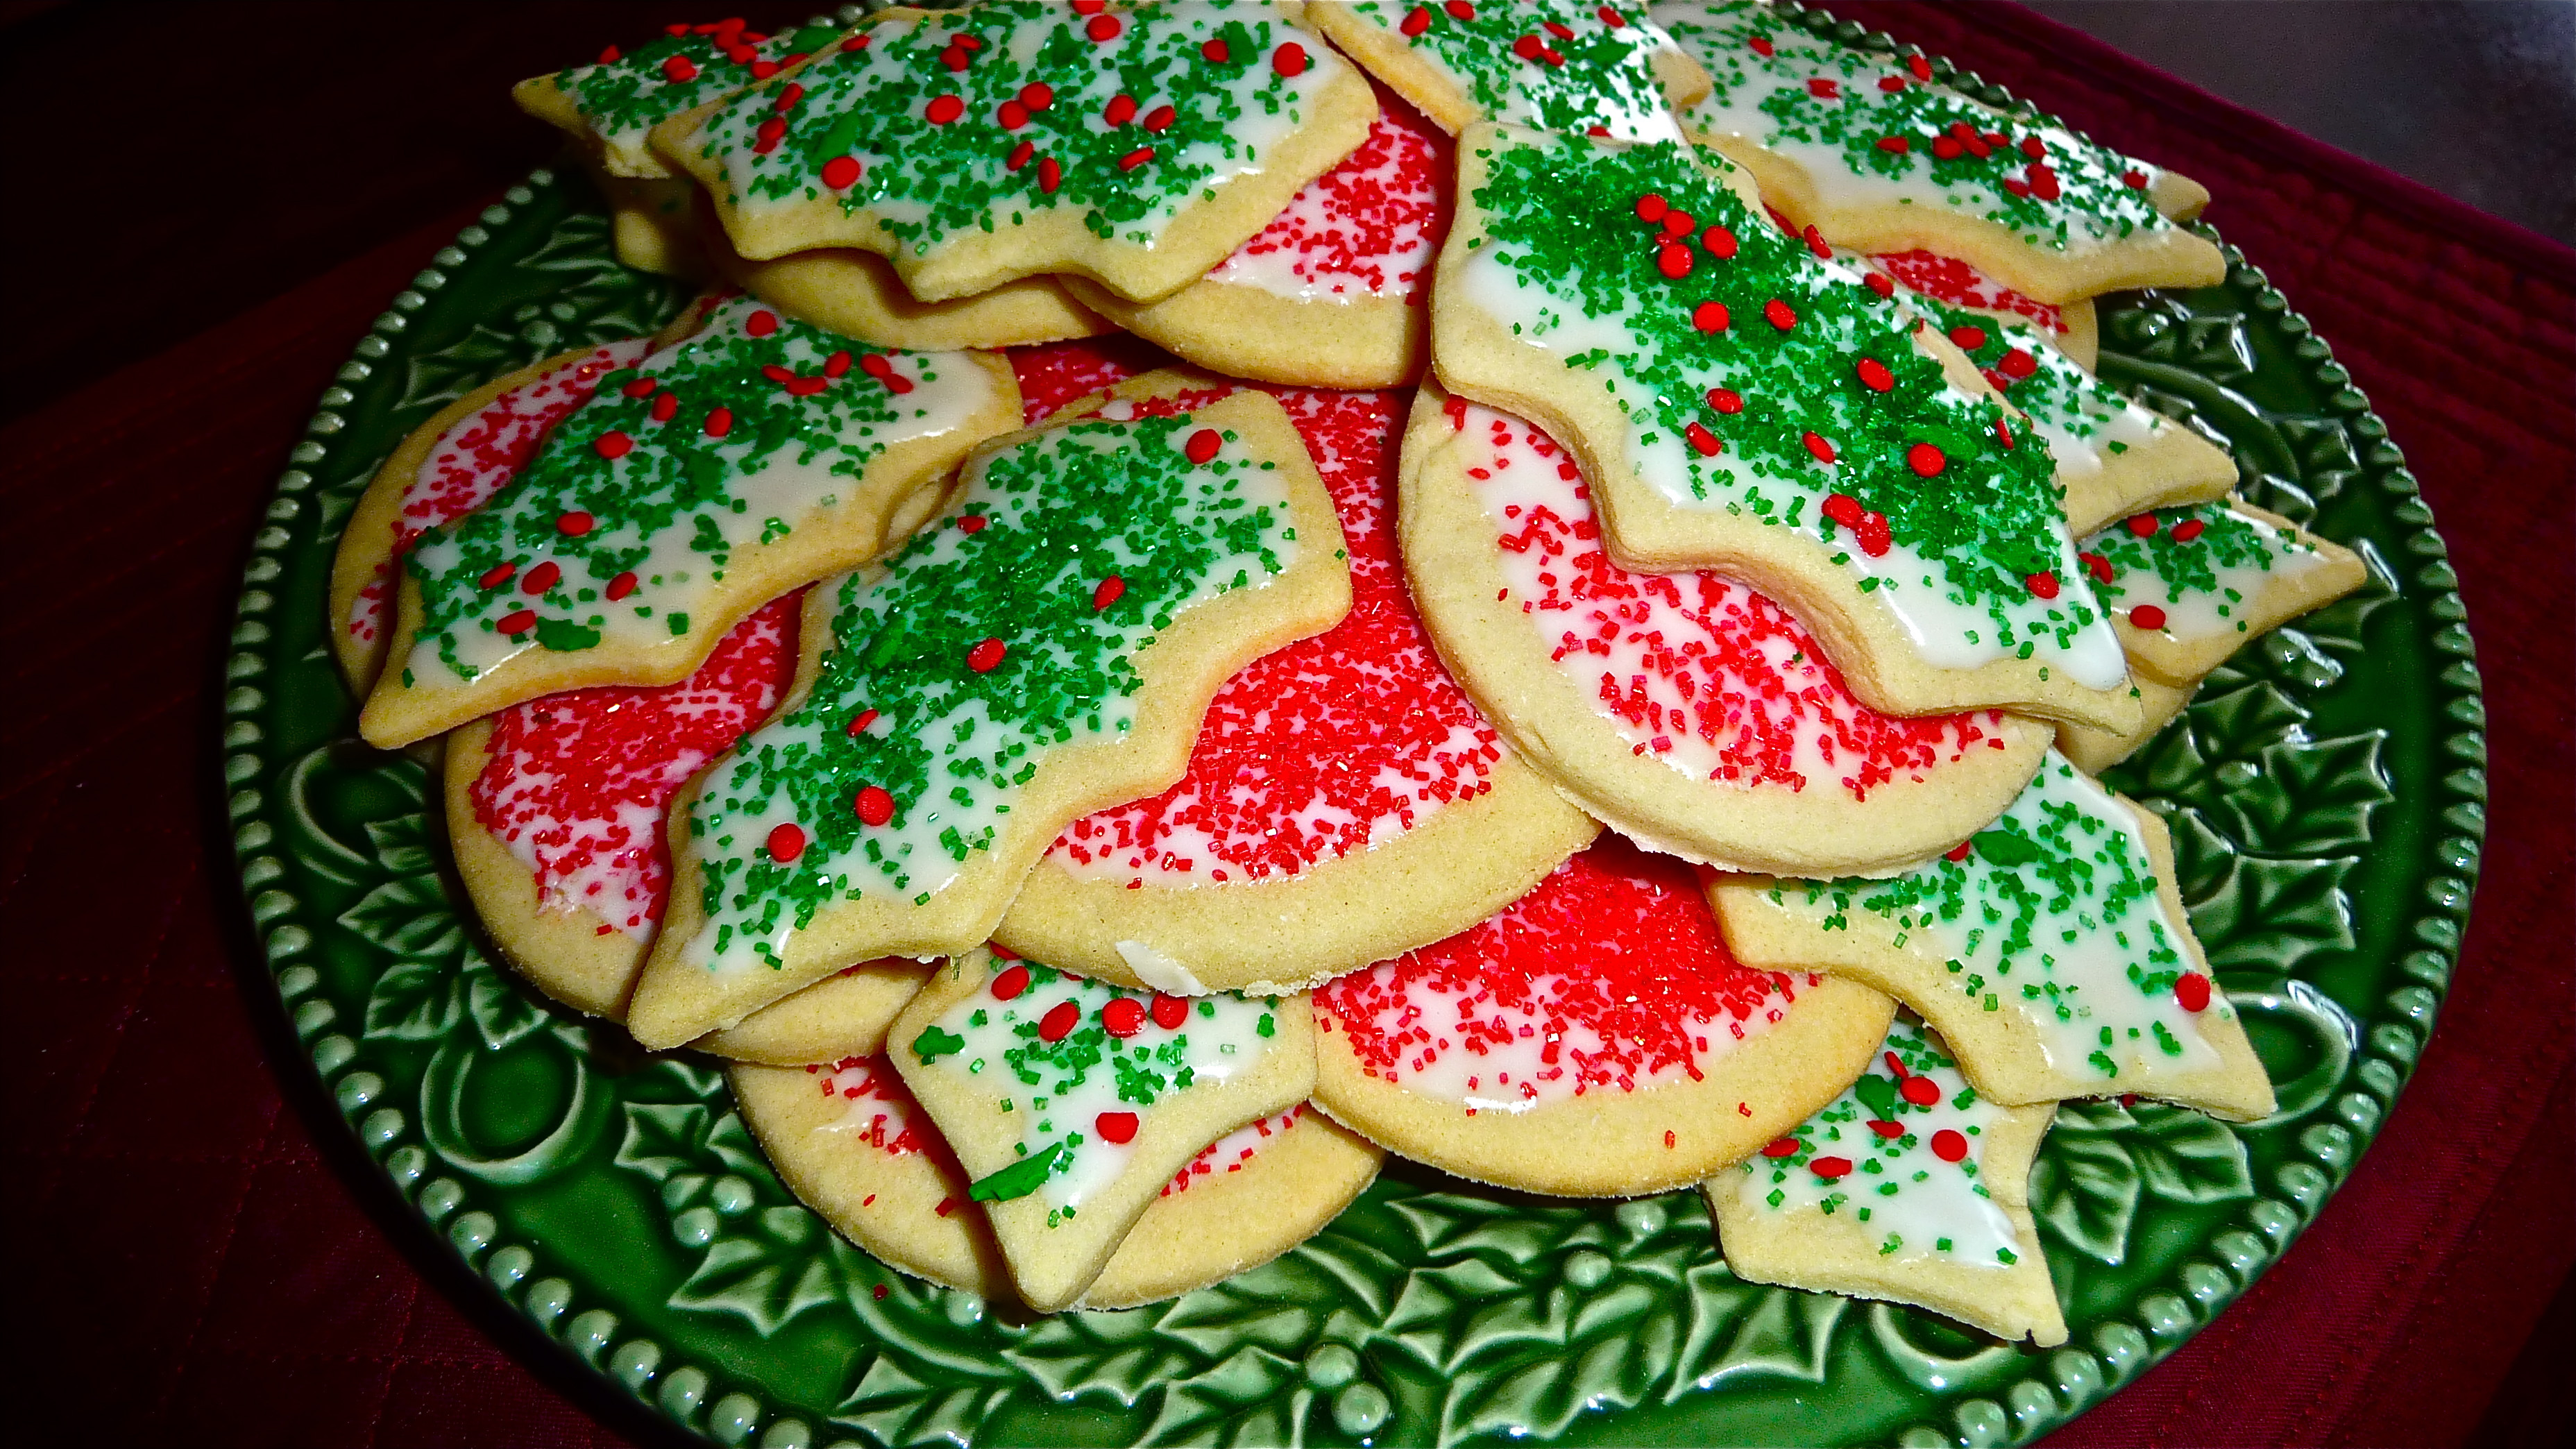 Classic Christmas Sugar Cookies
 A traditional Christmas treat — really good sugar cookies